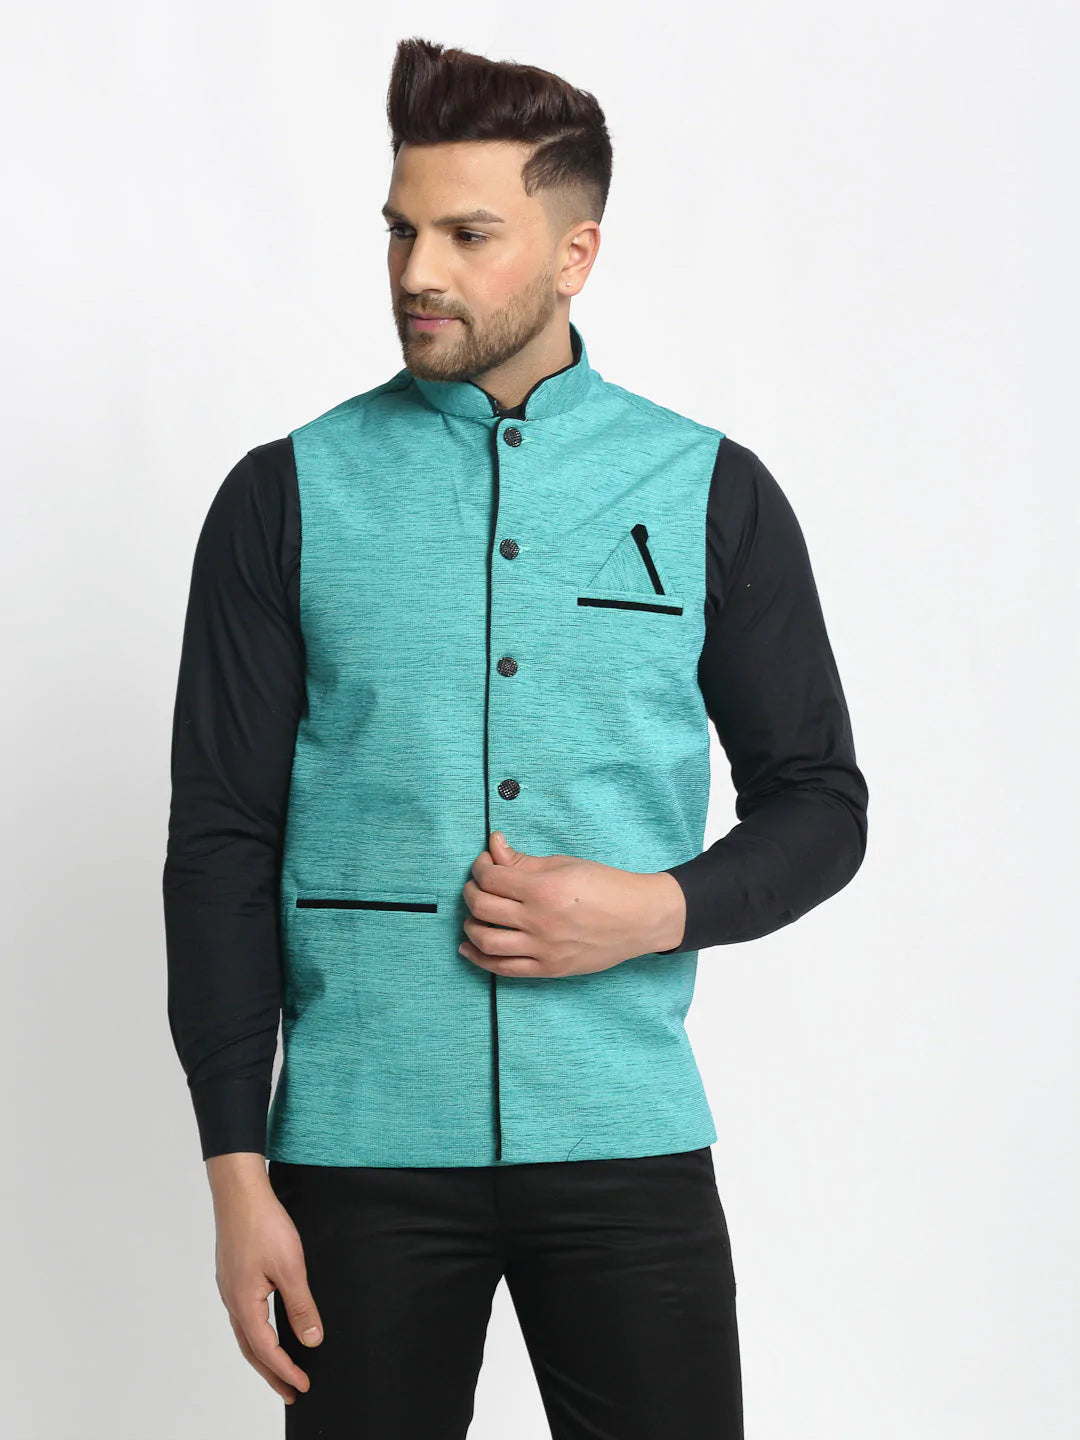 Jompers Men's Blue Solid Nehru Jacket with Square Pocket ( JOWC 4024Sky )